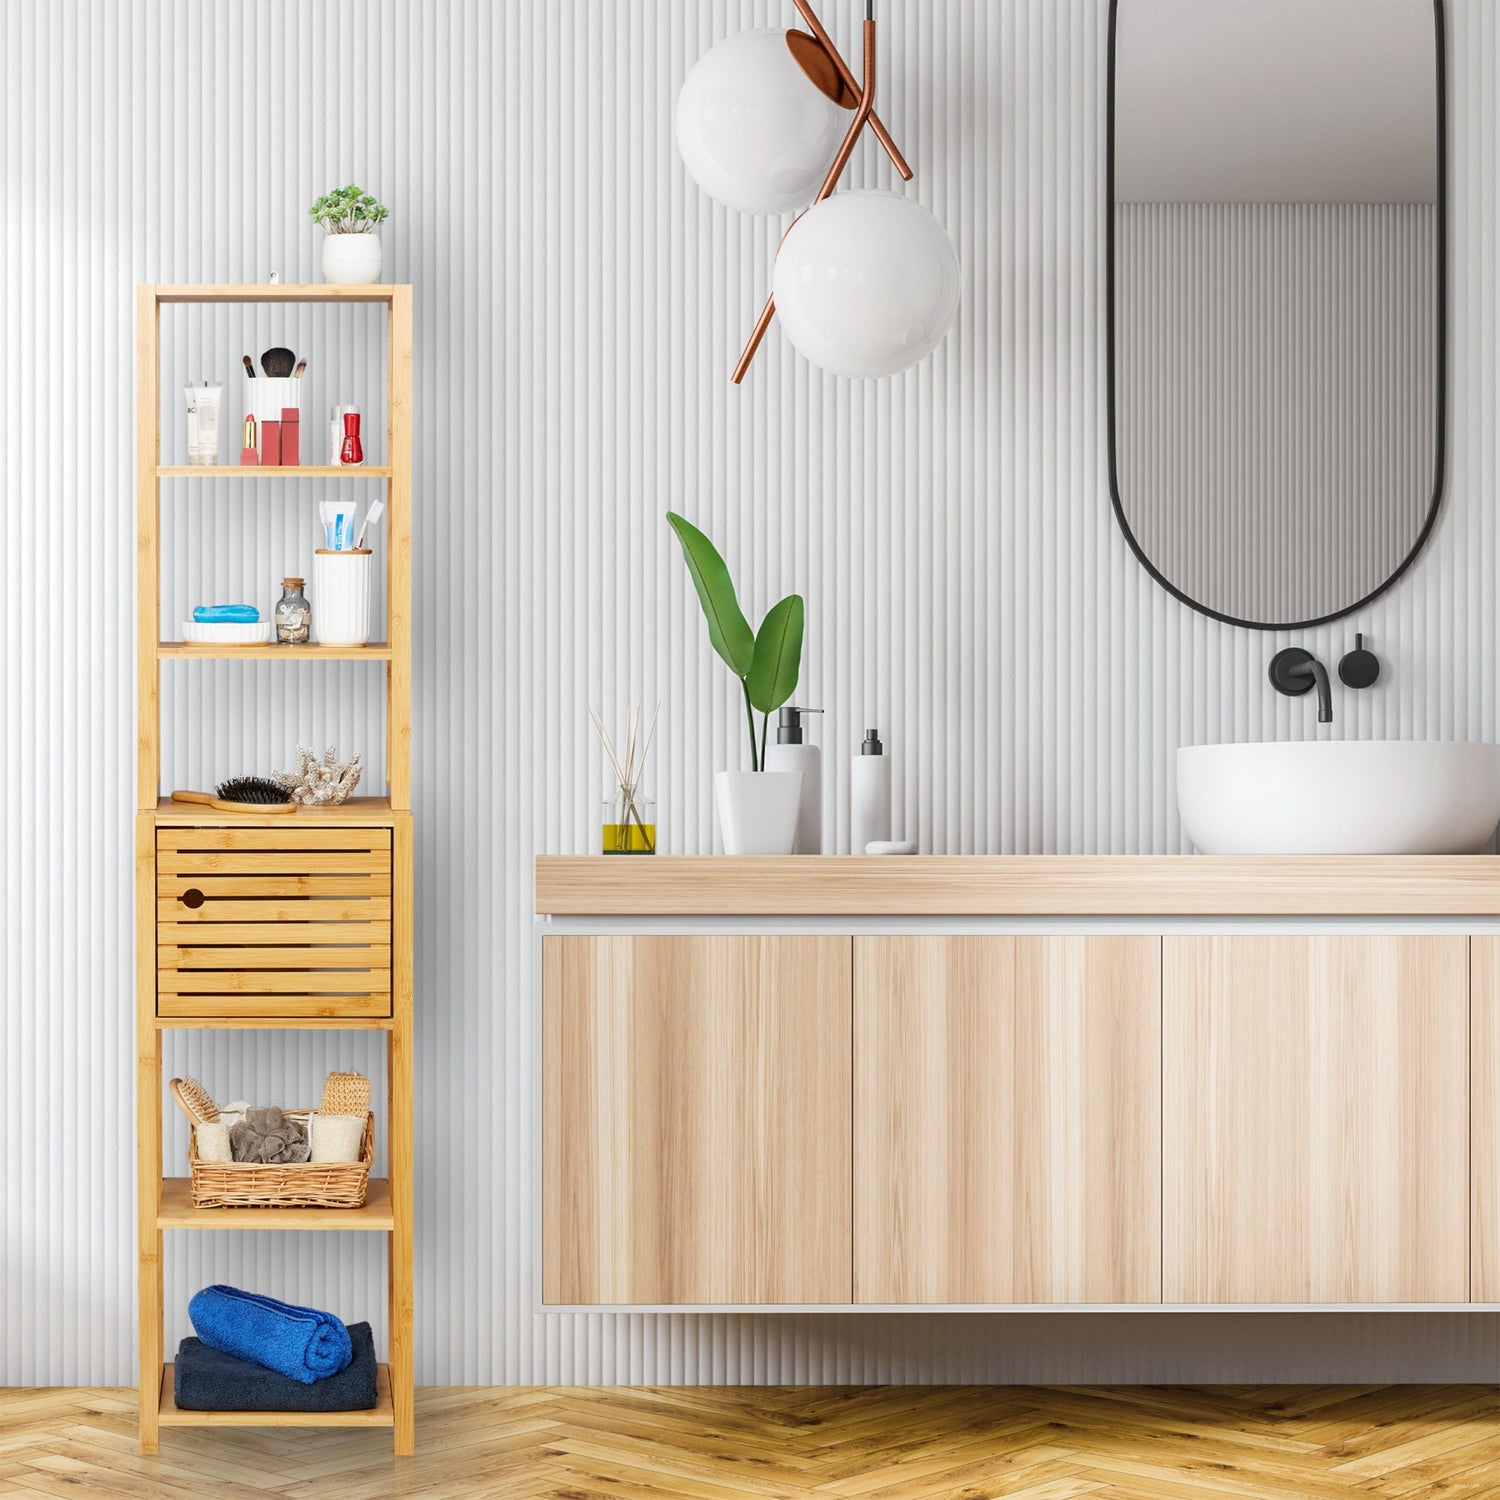 RelaxDays Bamboo Bathroom Cabinet with 7 Shelves Bamboo Bathrooms